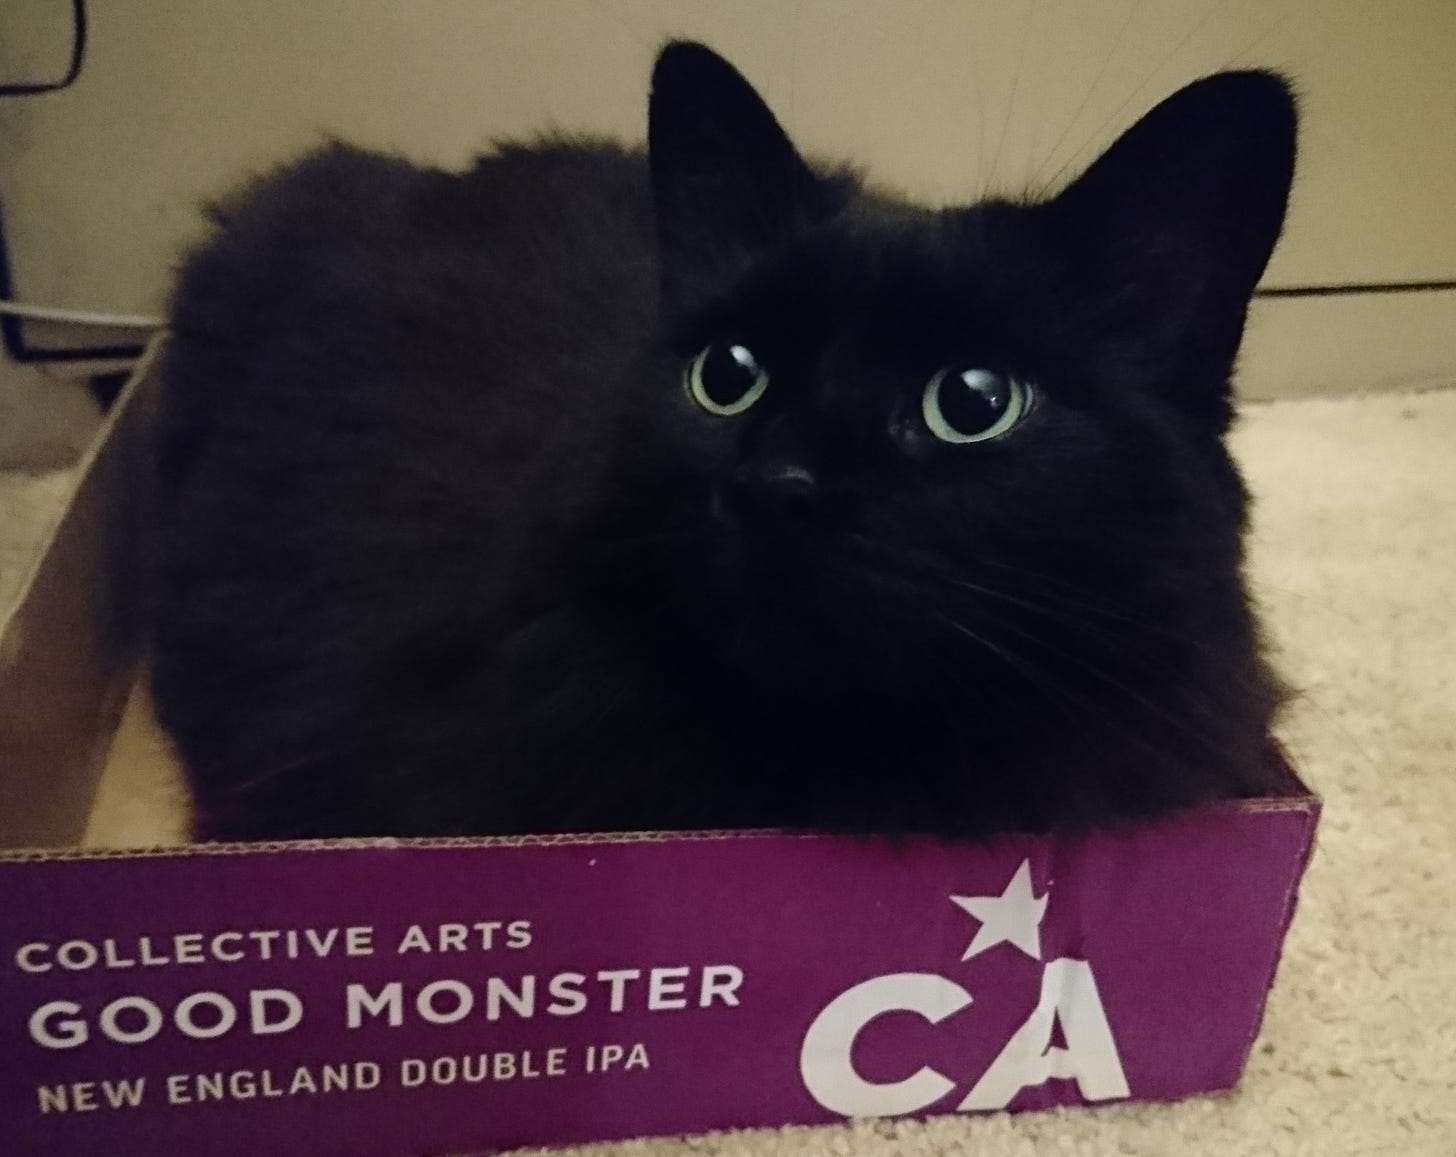 A cat sits inside of a flat which reads "good monster." The lighting causes the cat to be a silhouette, gazing upwards to the left with bright green eyes and a reflection on her nose as the only notable features.